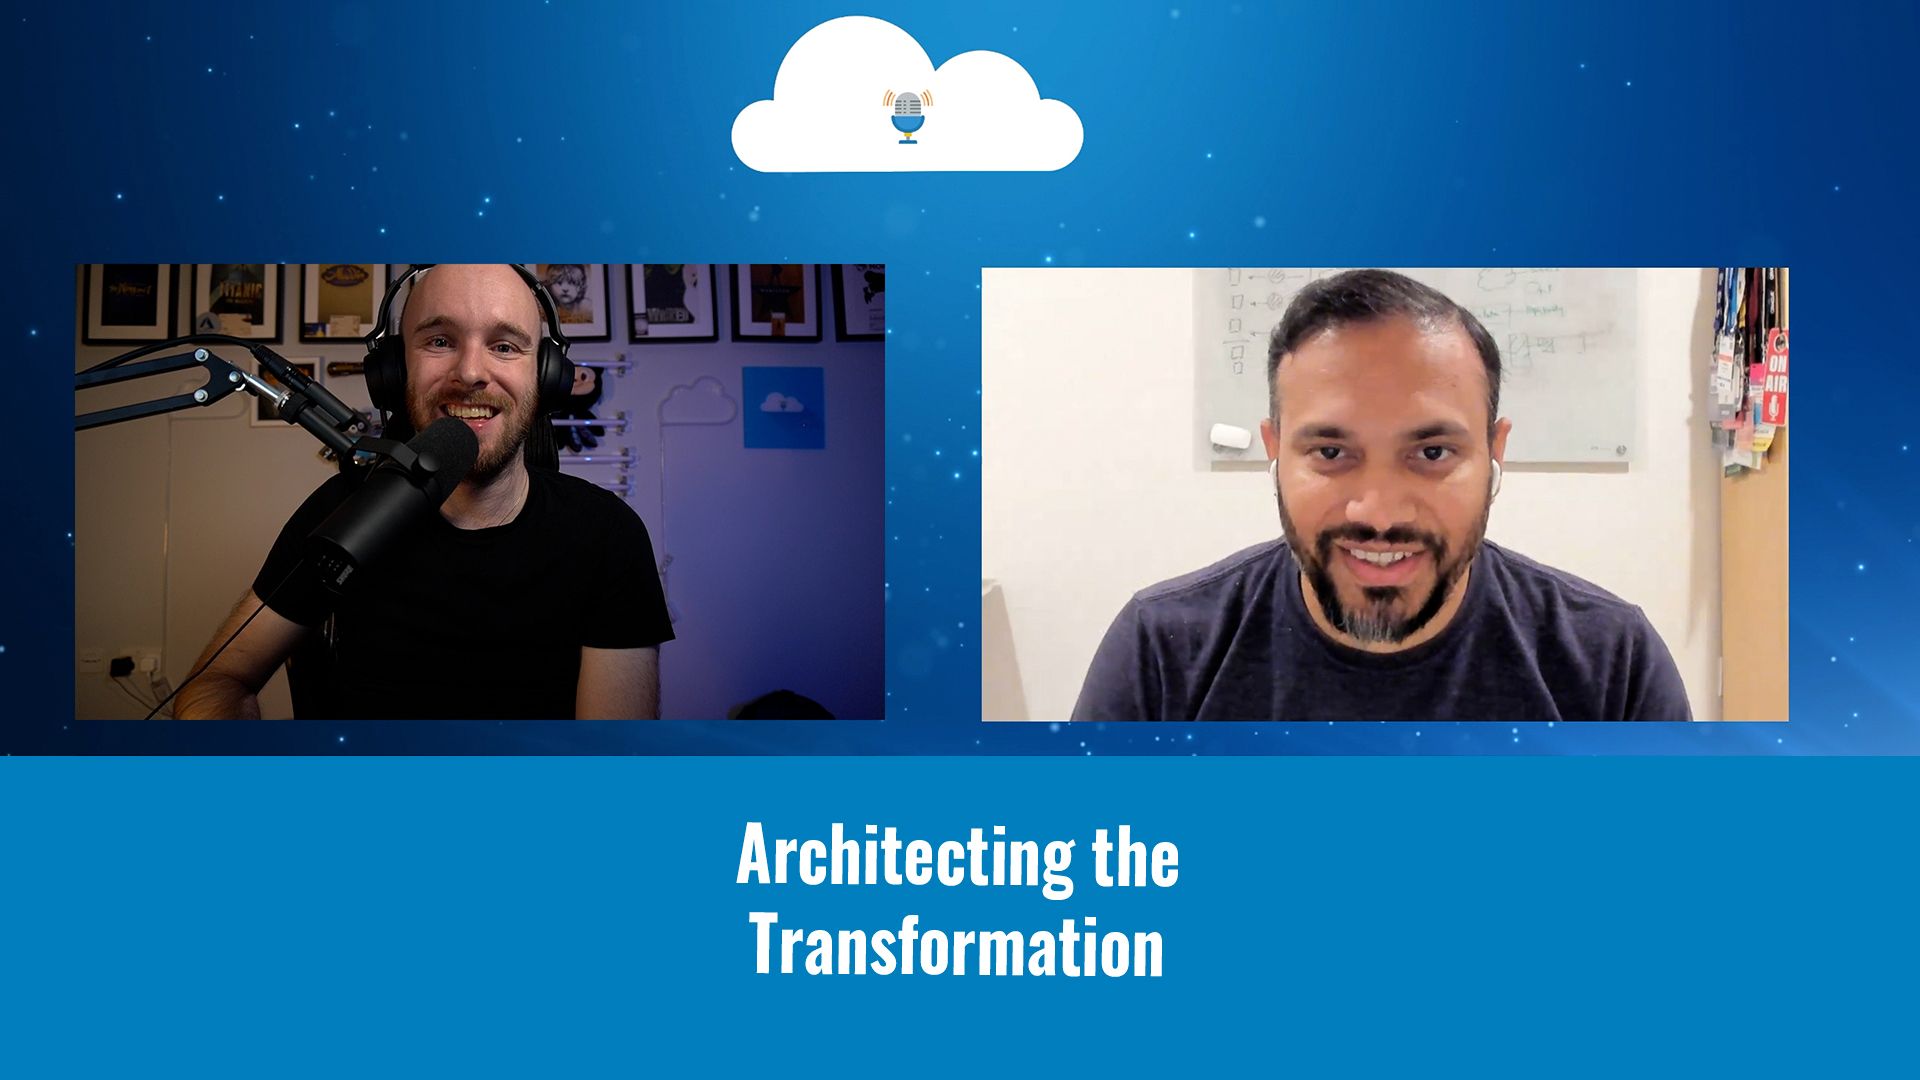 Tales from the Real World - Architecting the Transformation